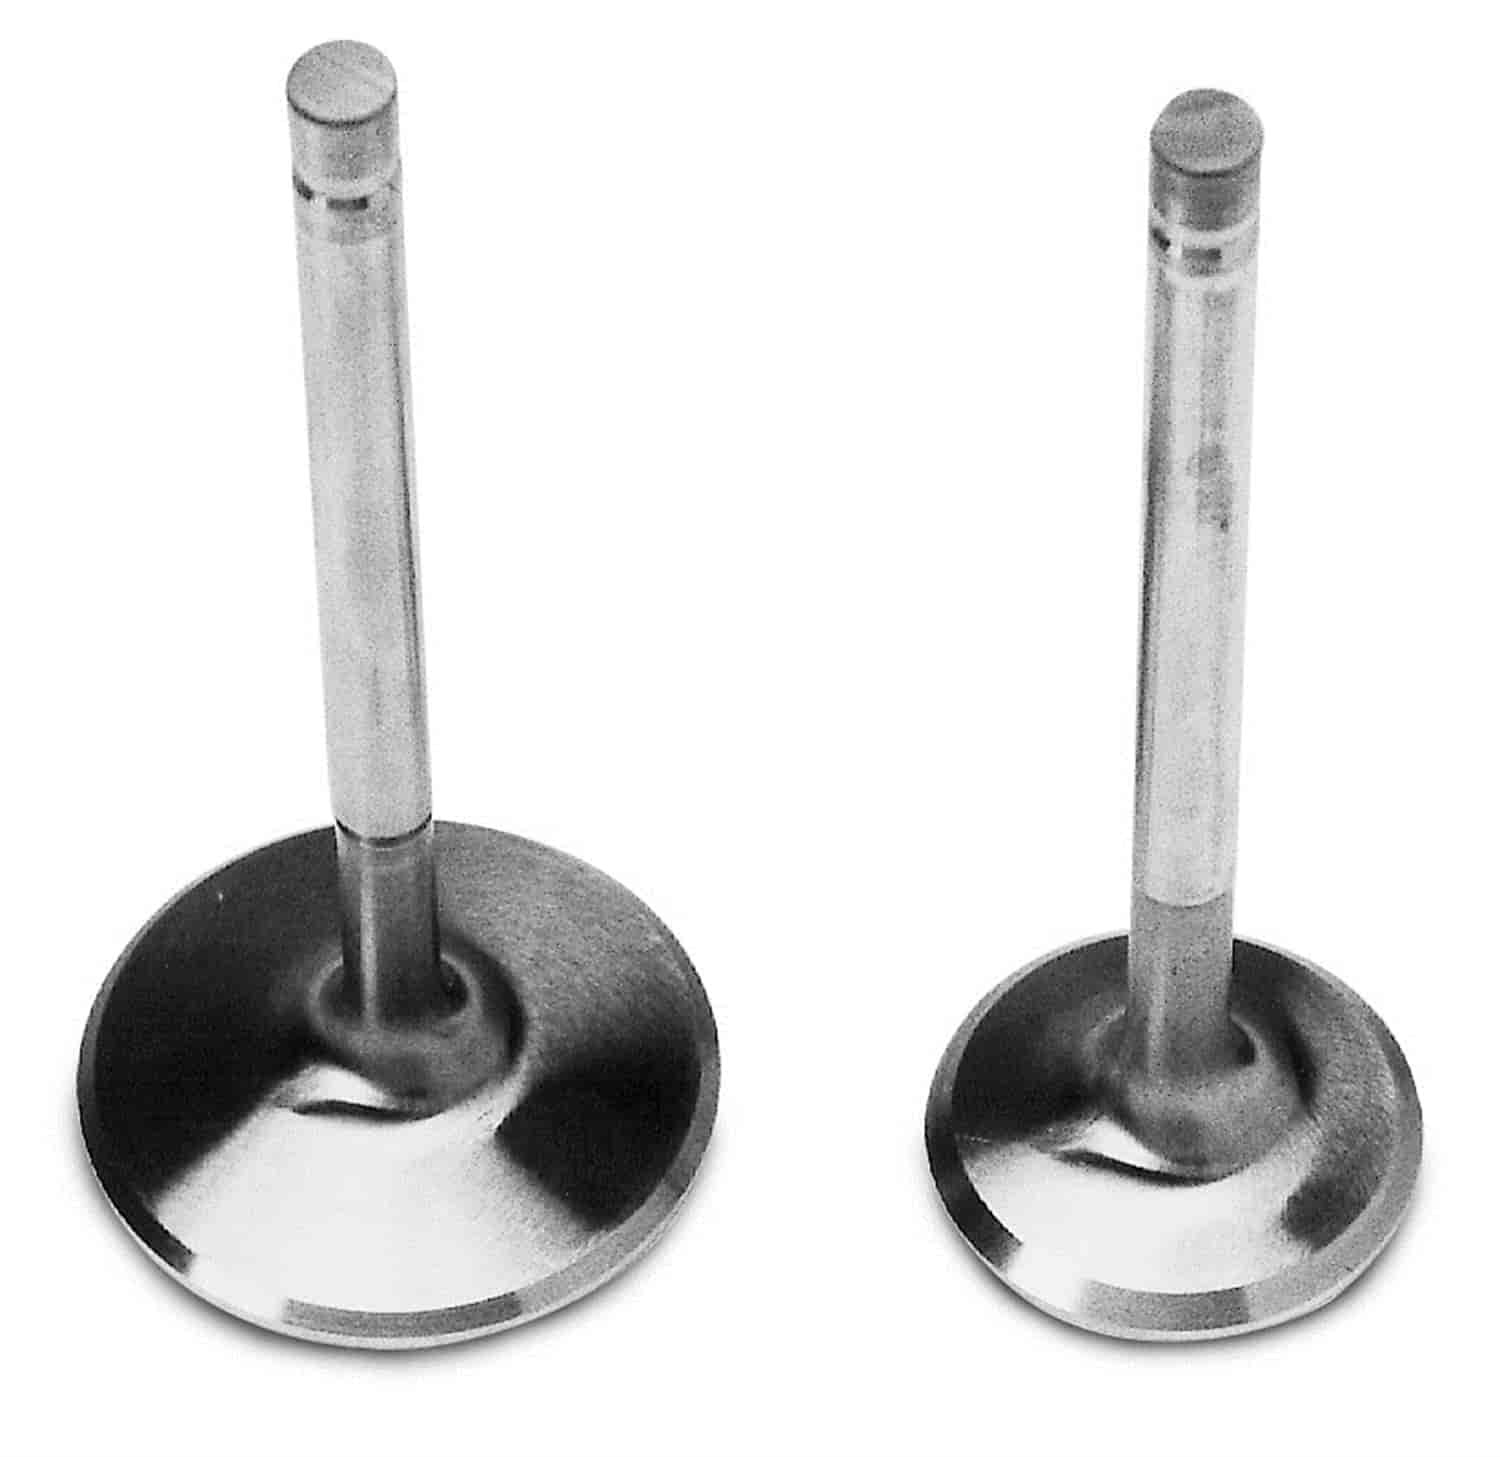 Single Exhaust Valve 1.89" for Marine Big Block Chevy Performer RPM Heads #350-61459, 350-61559, & 350-61555